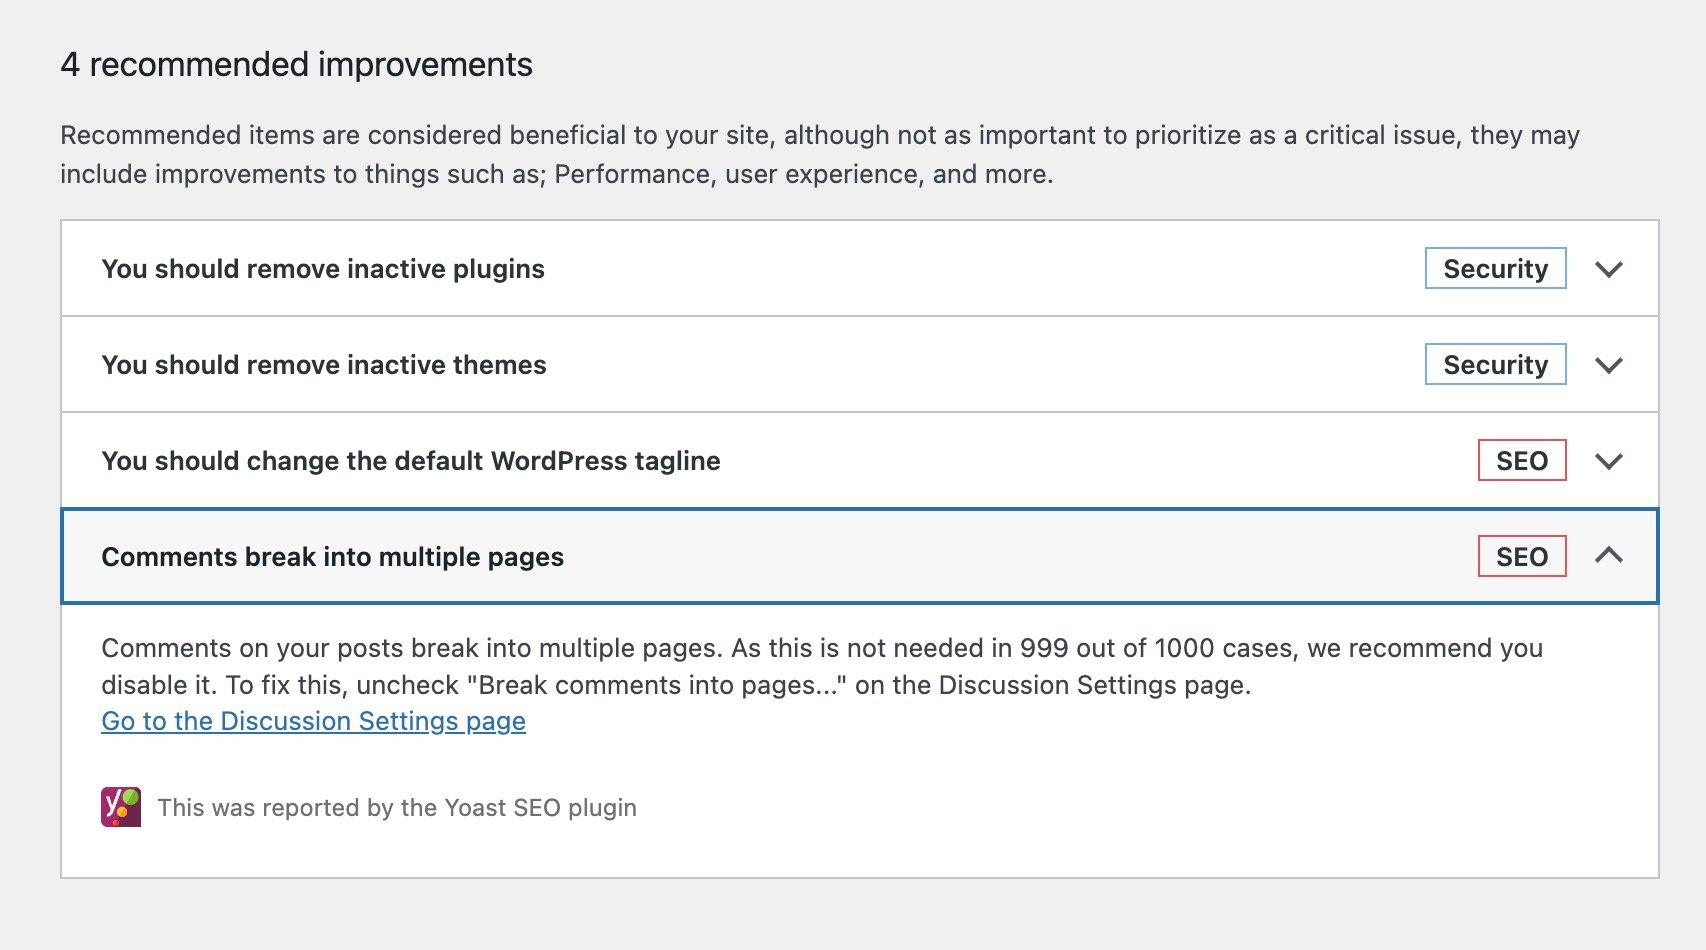 WordPress Site Health recommended improvements section with comments break into multiple pages section expanded.